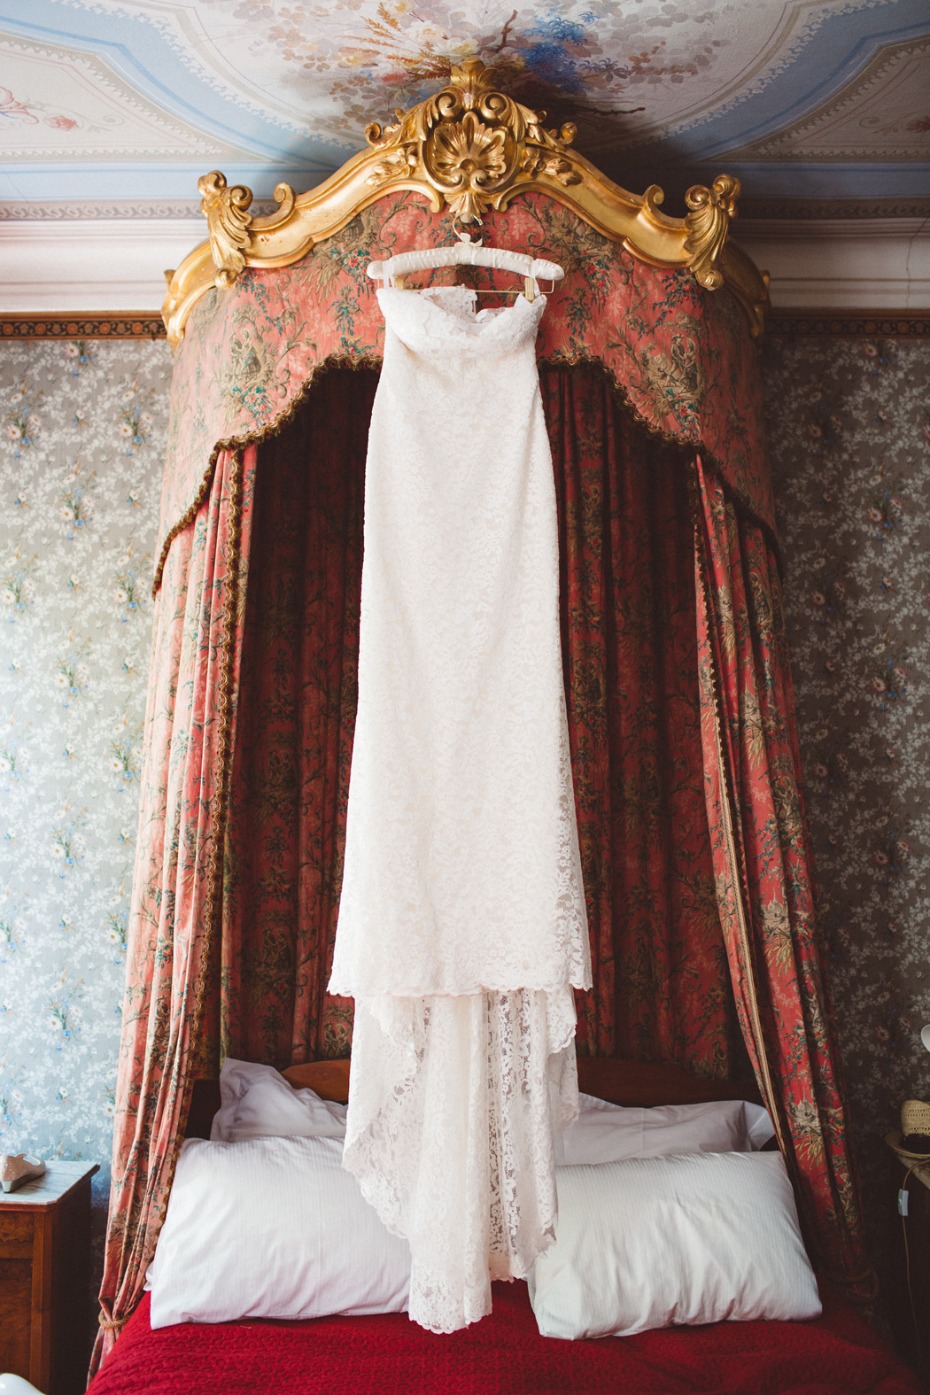 White lace wedding dress from Le Papillon